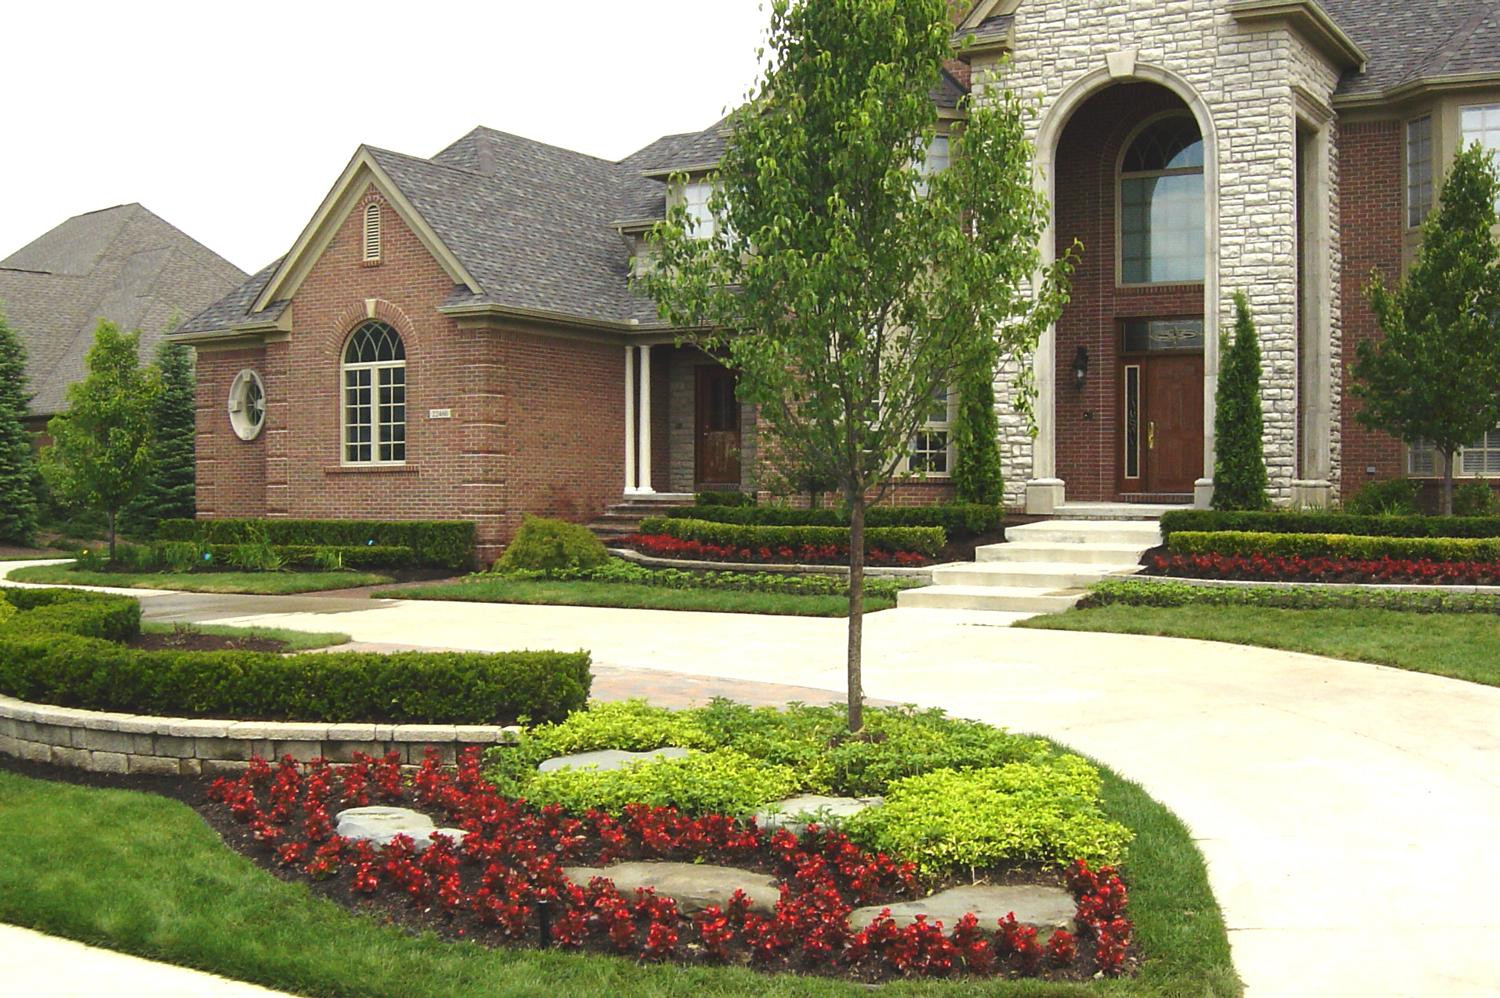 Landscape Ideas Front Yard
 7 Best Front Yard Landscaping Ideas For A Good Impression